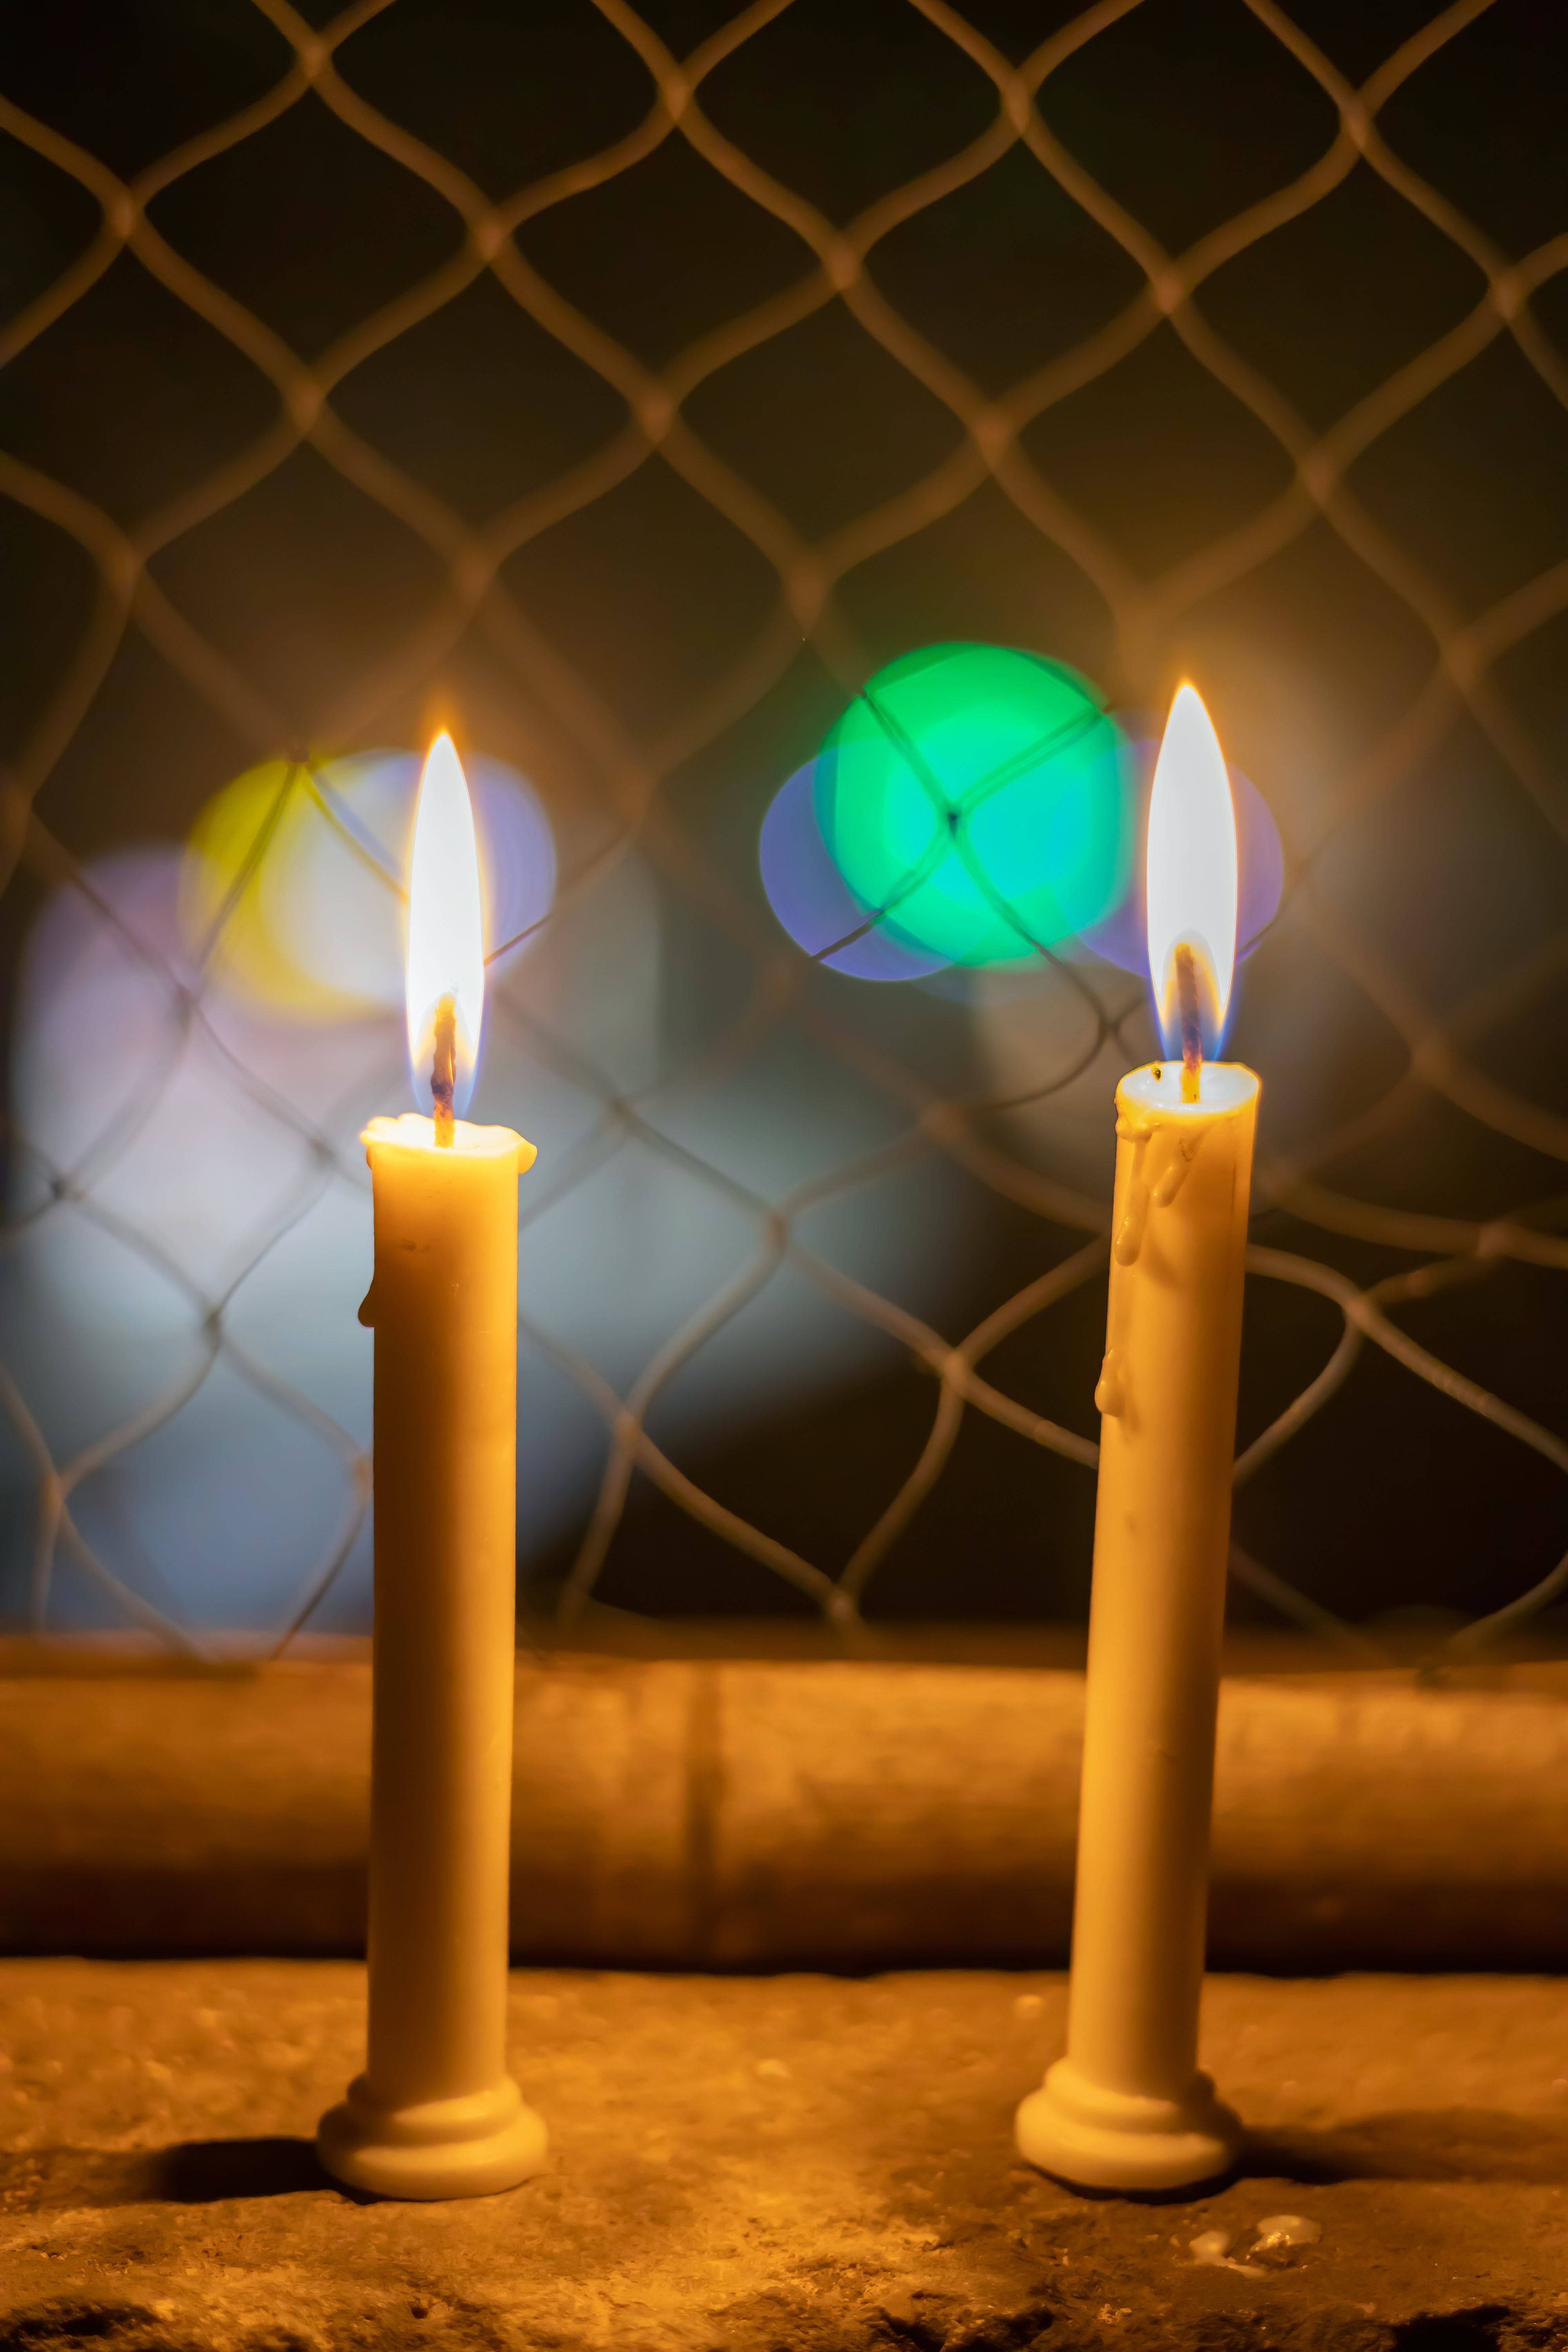 Two lit candles site on a ledge in front of a fence.